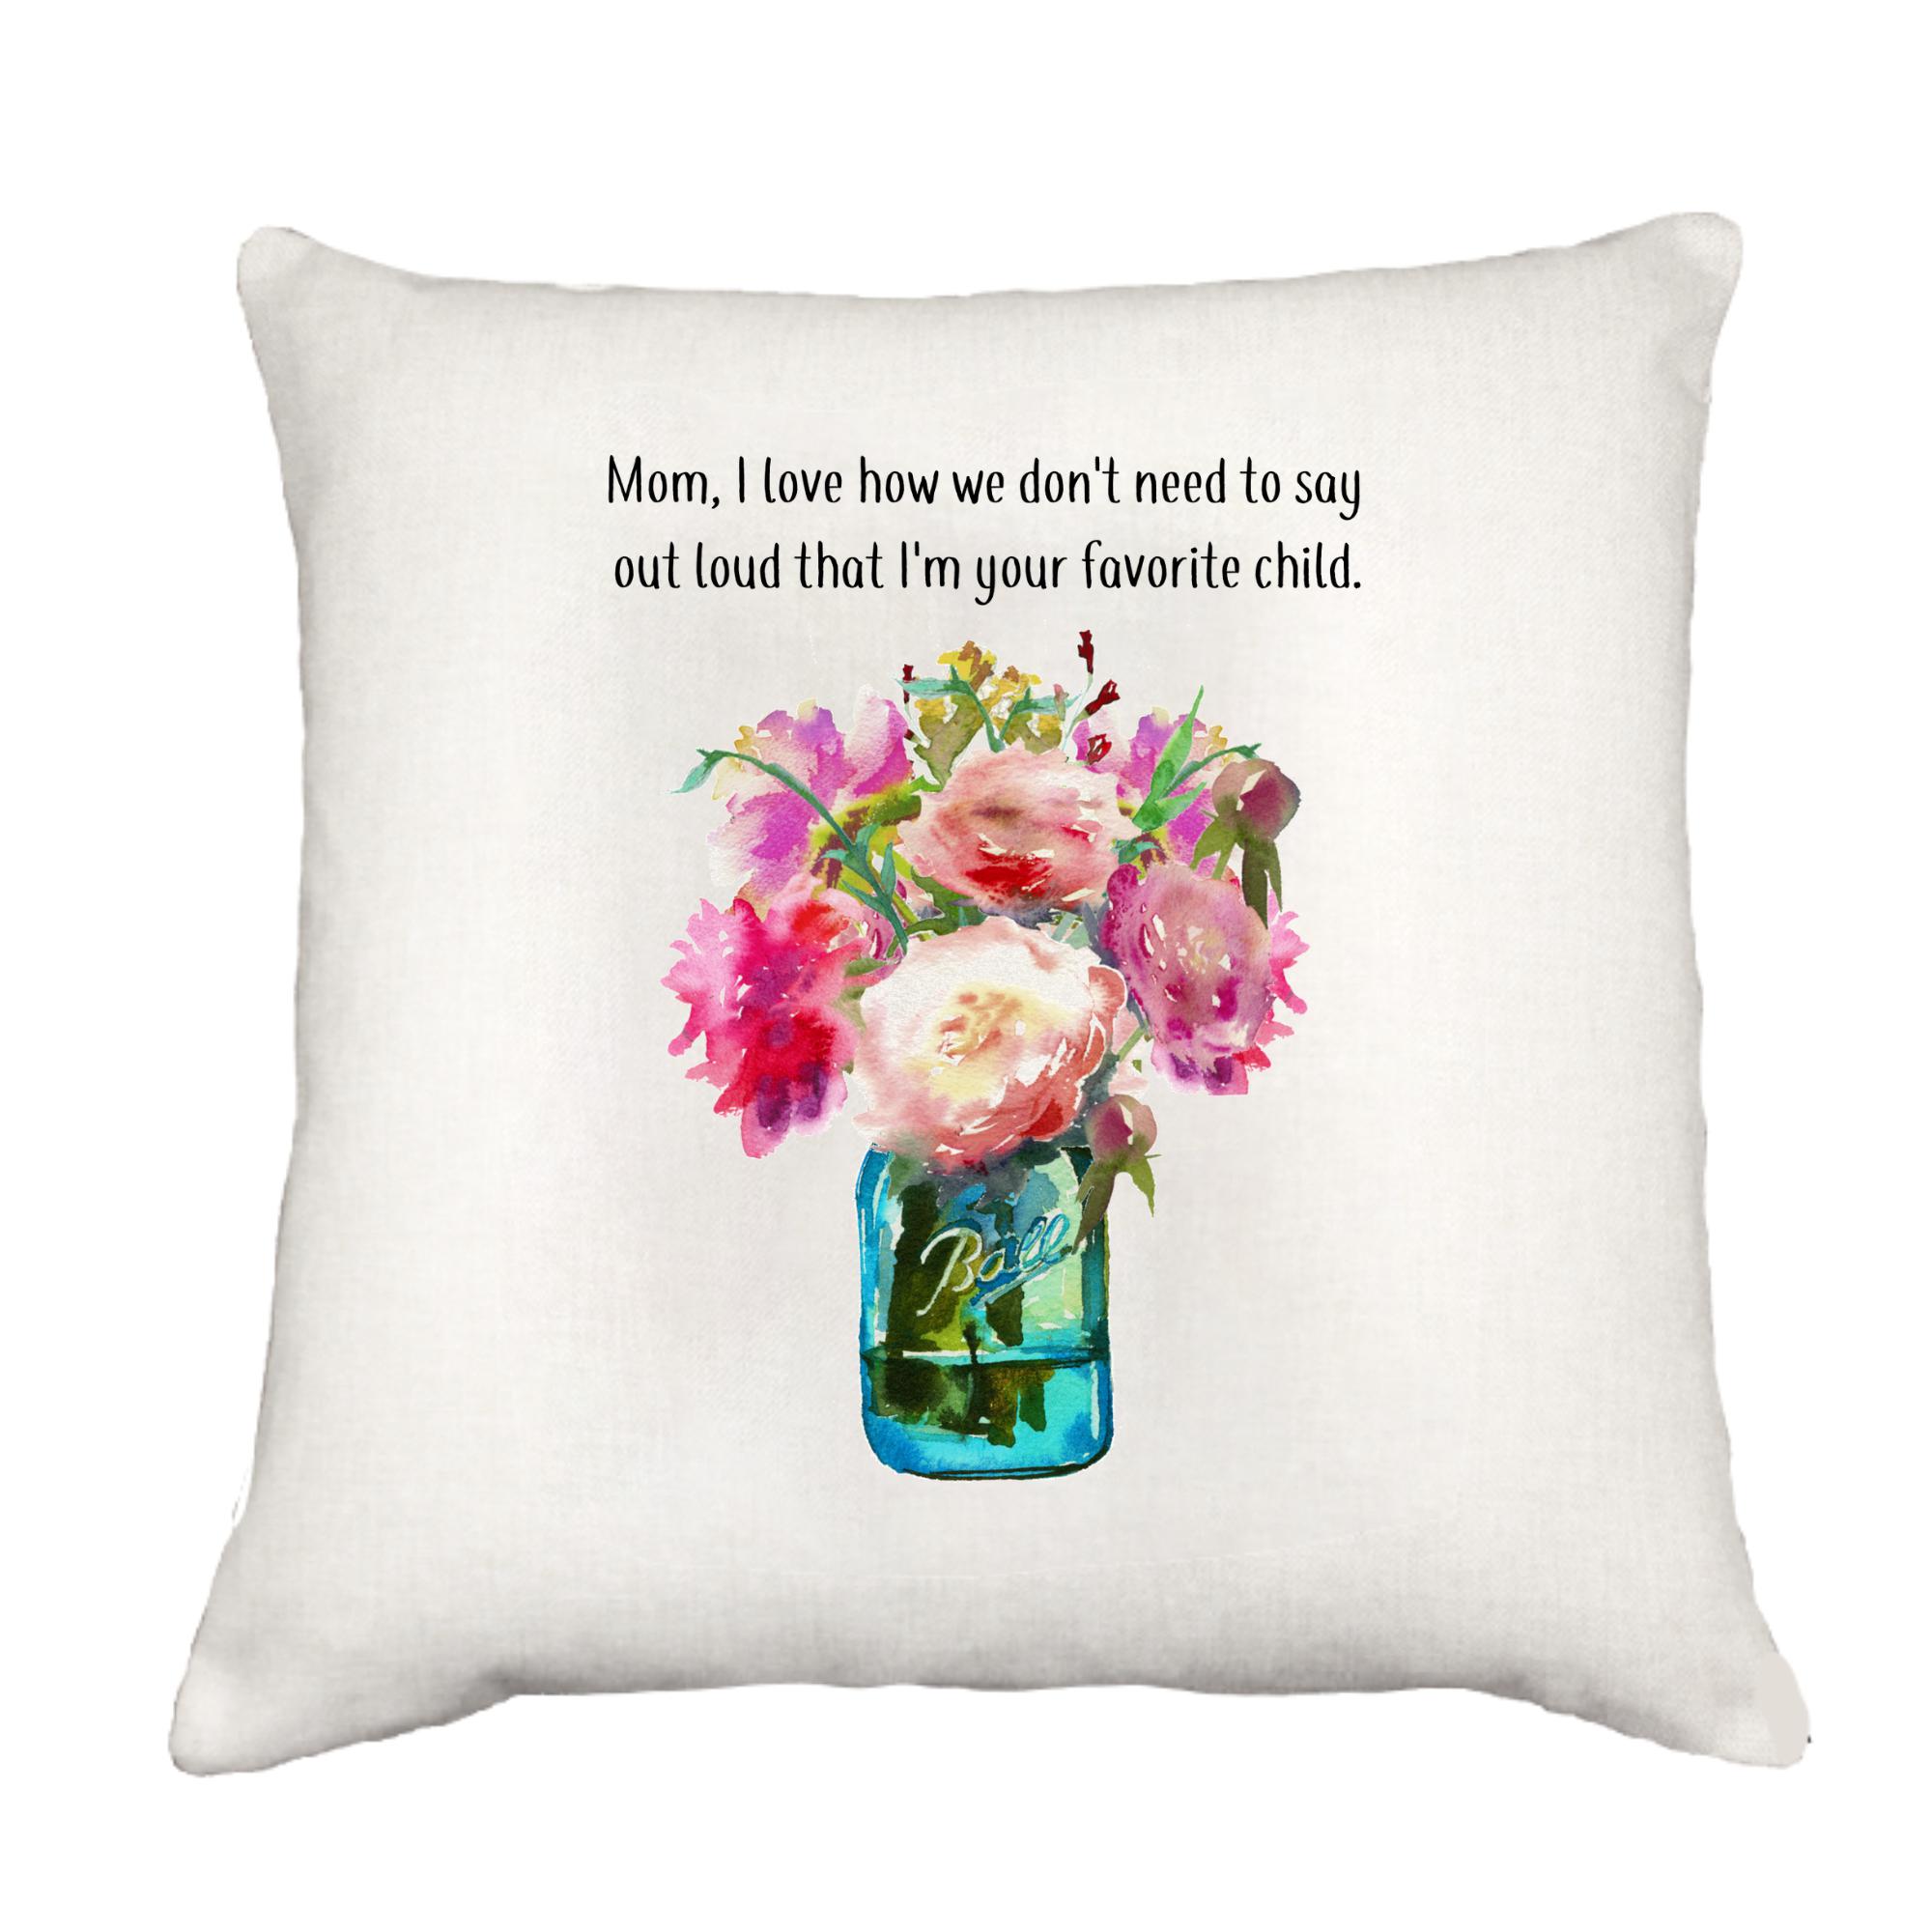 Mom Favorite Child Cottage Pillow Throw/Decorative Pillow - Southern Sisters